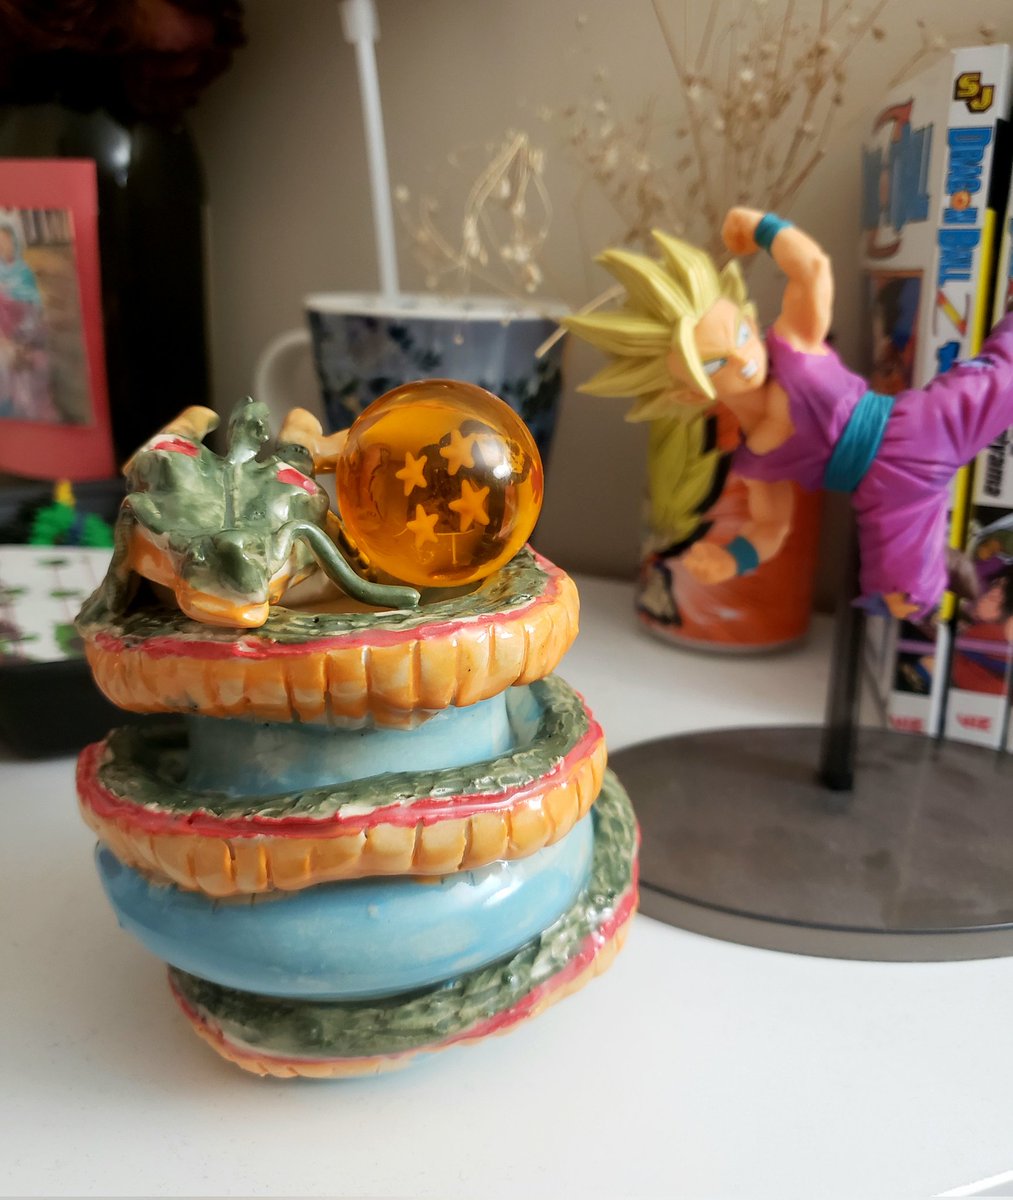 I made Shenron during an 8 week pottery course. He may be a little sloppy (I had to rush him) but look how cute he is!